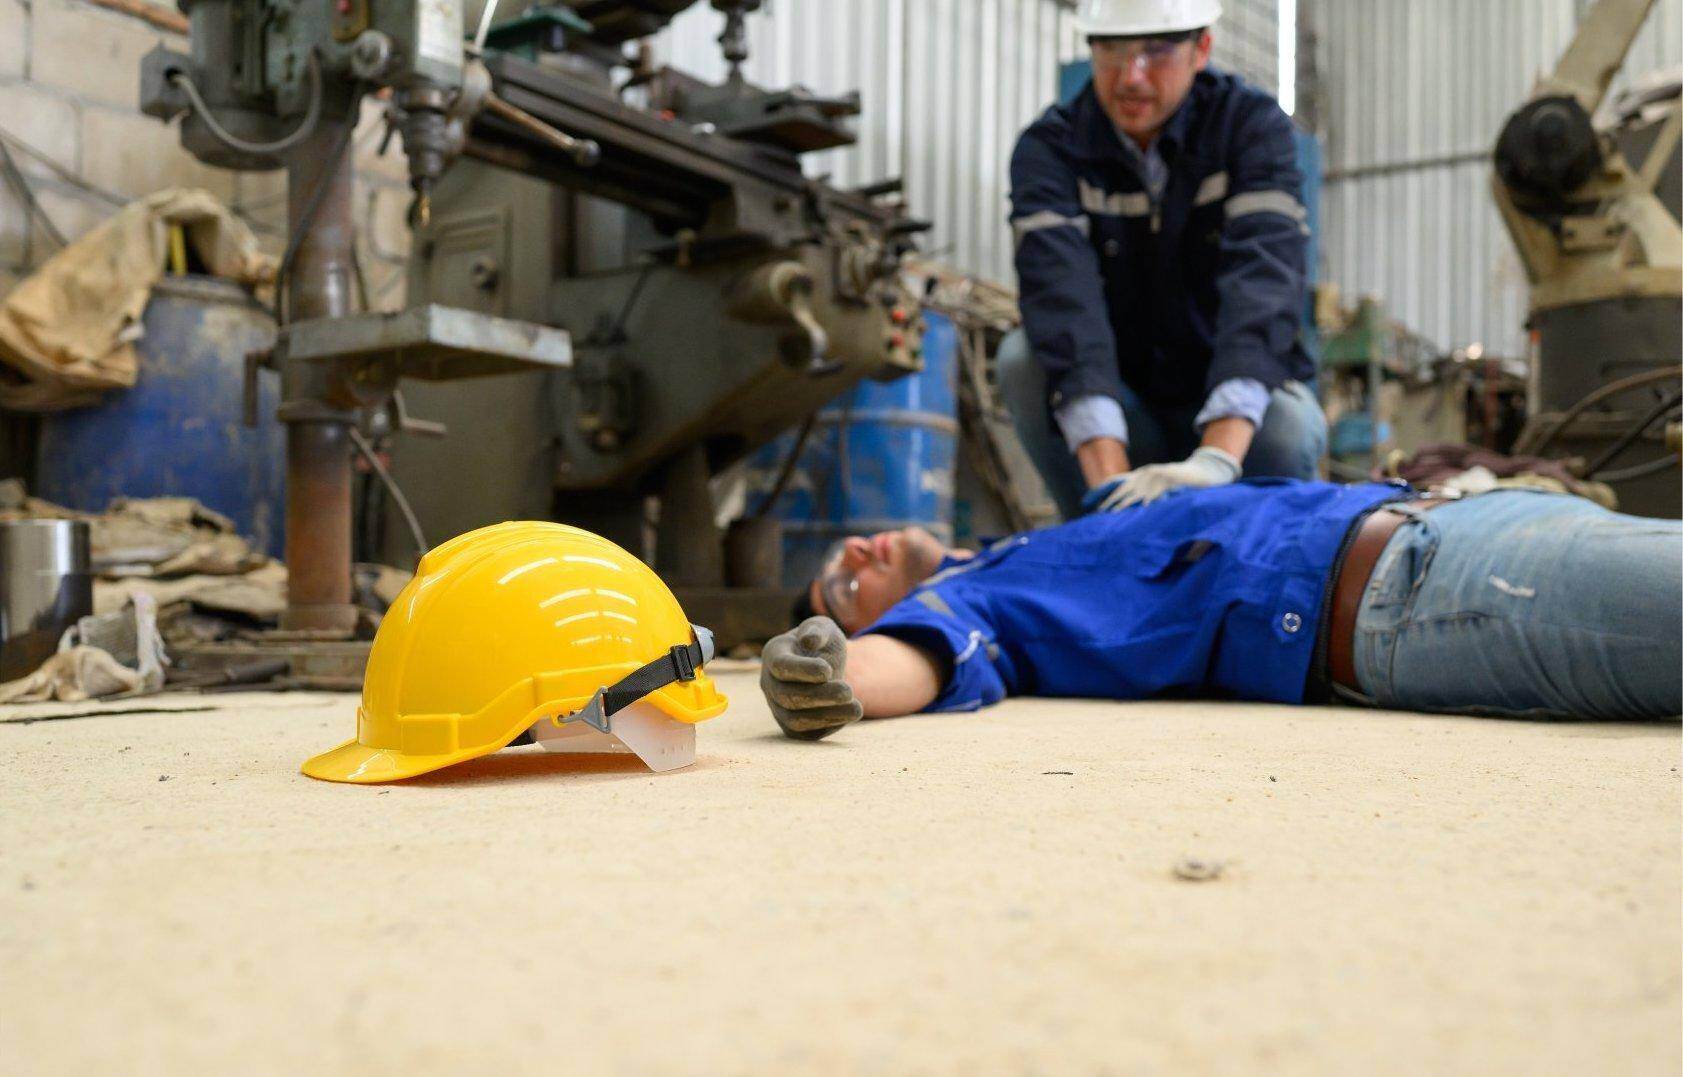 An unconscious man who has been injured on the job who will file for workers compensation in Kingsland, Georgia